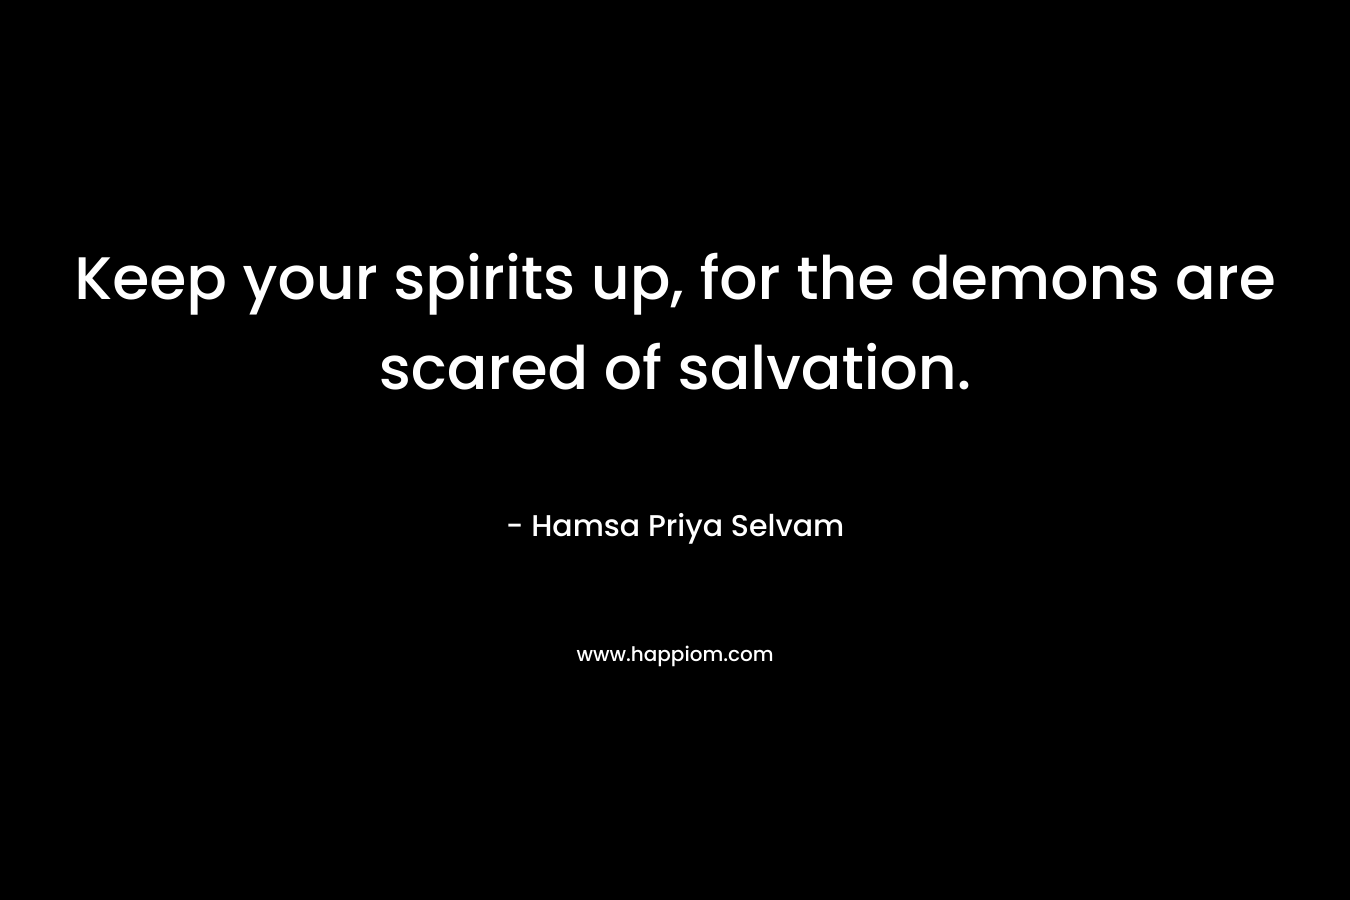 Keep your spirits up, for the demons are scared of salvation.